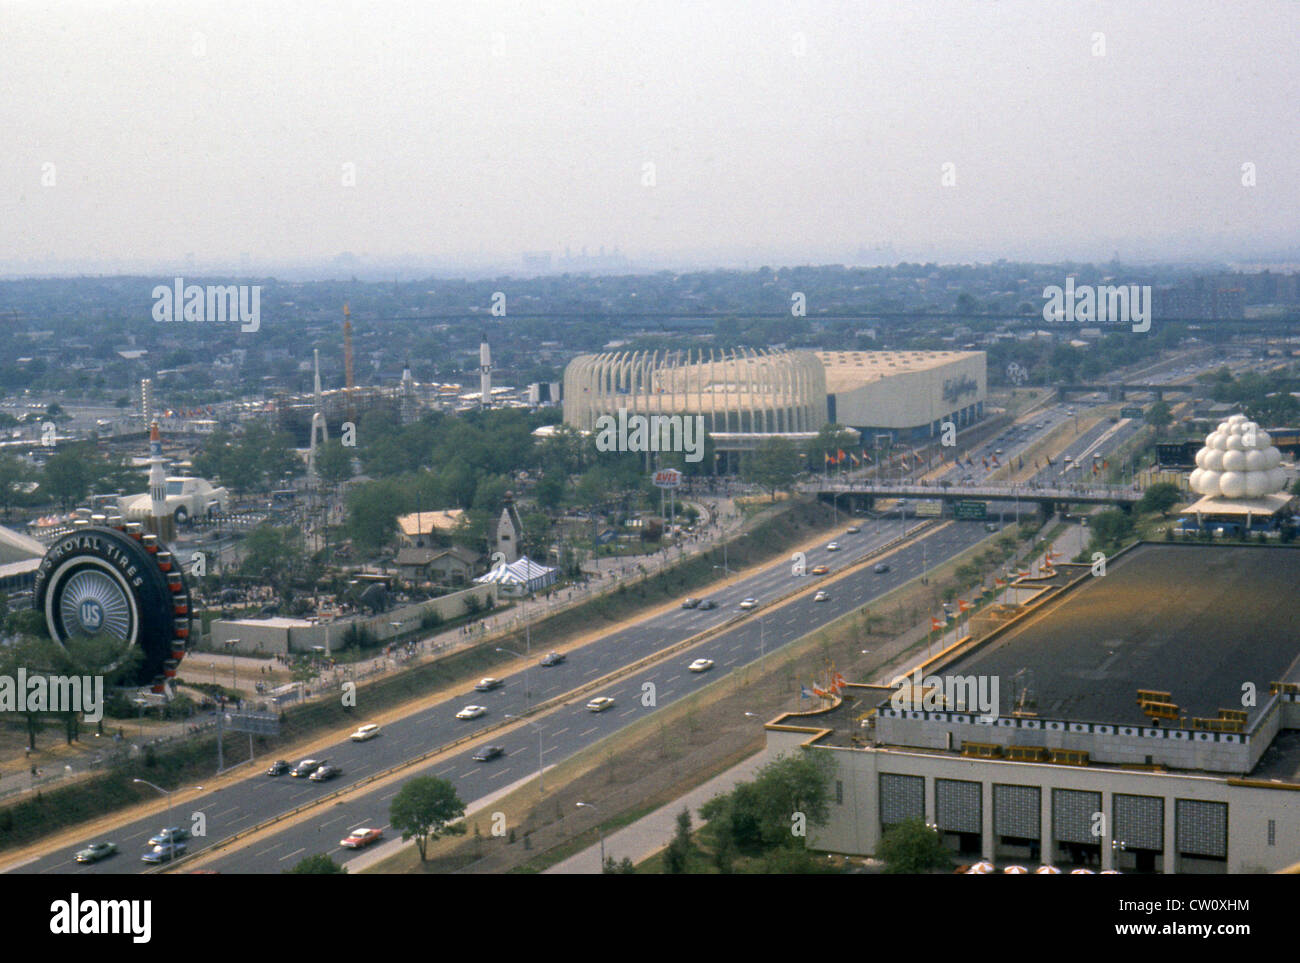 Original photograph taken in 1964. 1964 New York World's Fair, aerial view from the New York Pavilion. Stock Photo